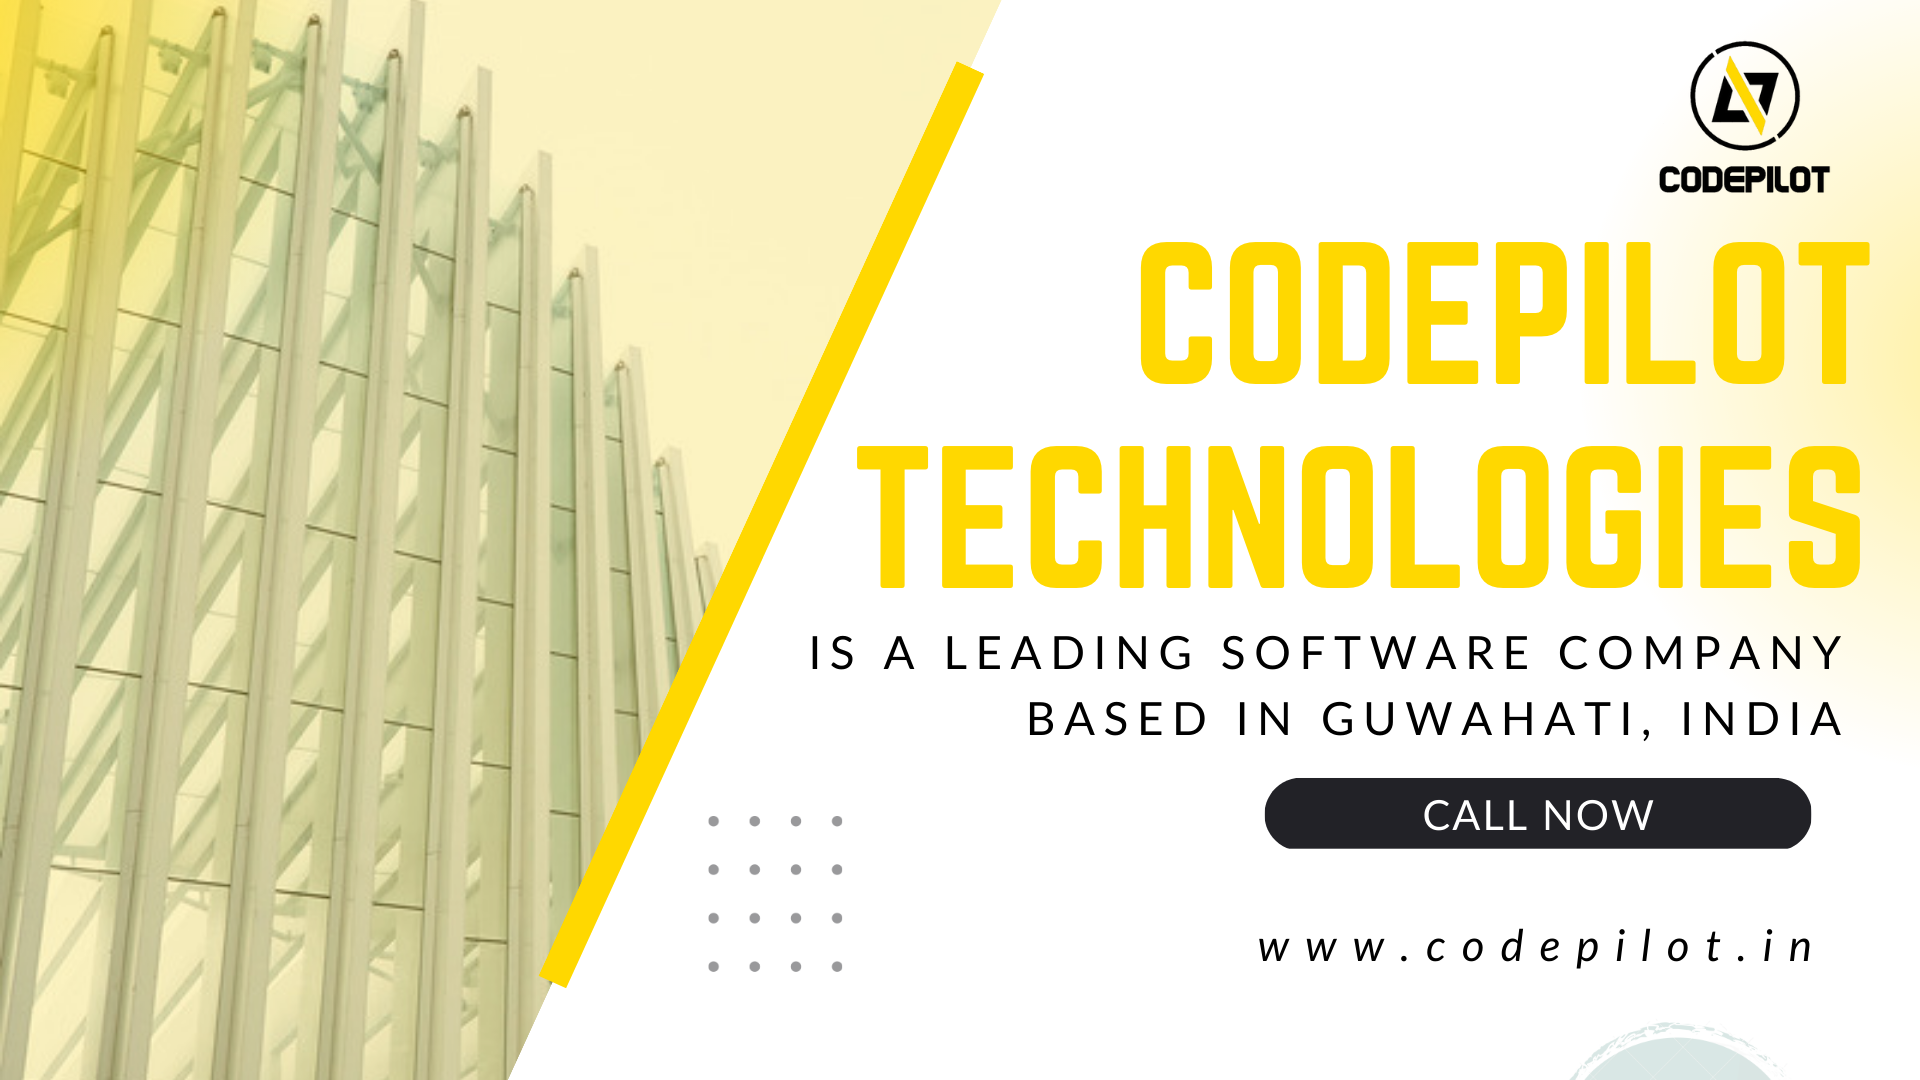 Codepilot Technologies is a leading software company based in Guwahati, India